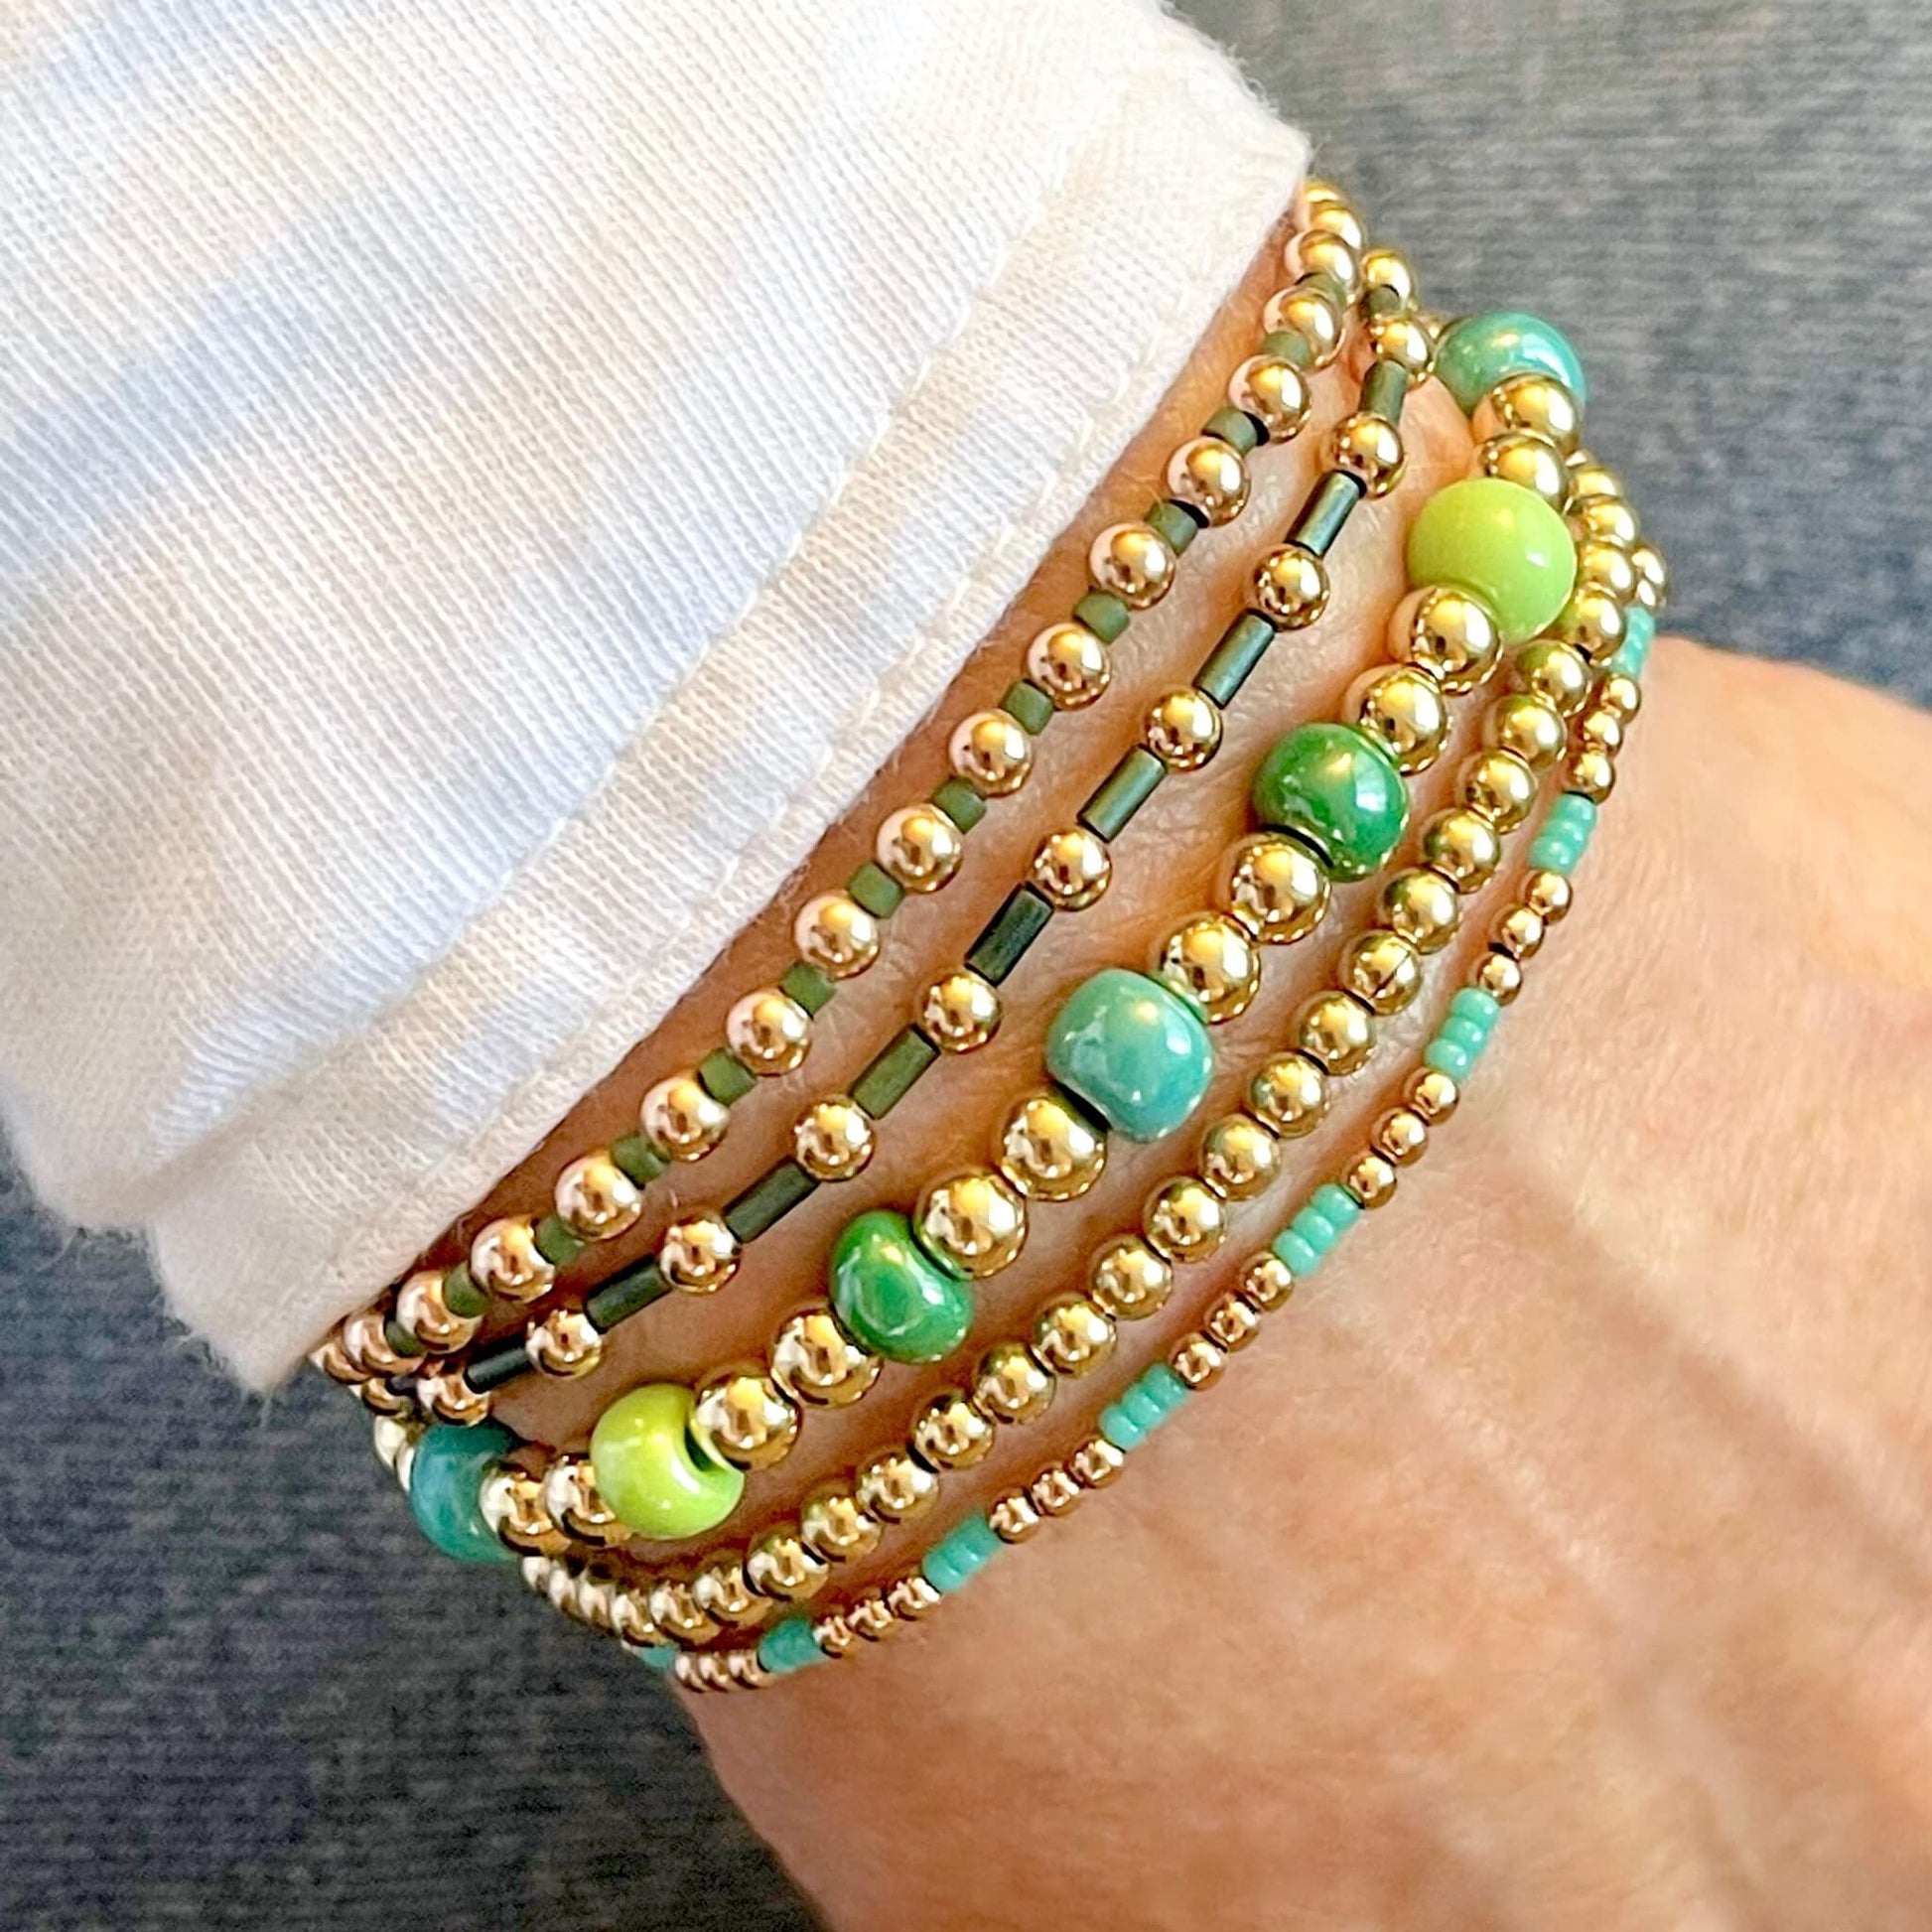 14K gold filled and monochomatic shades of green beaded ball stretch bracelet stack of 5.